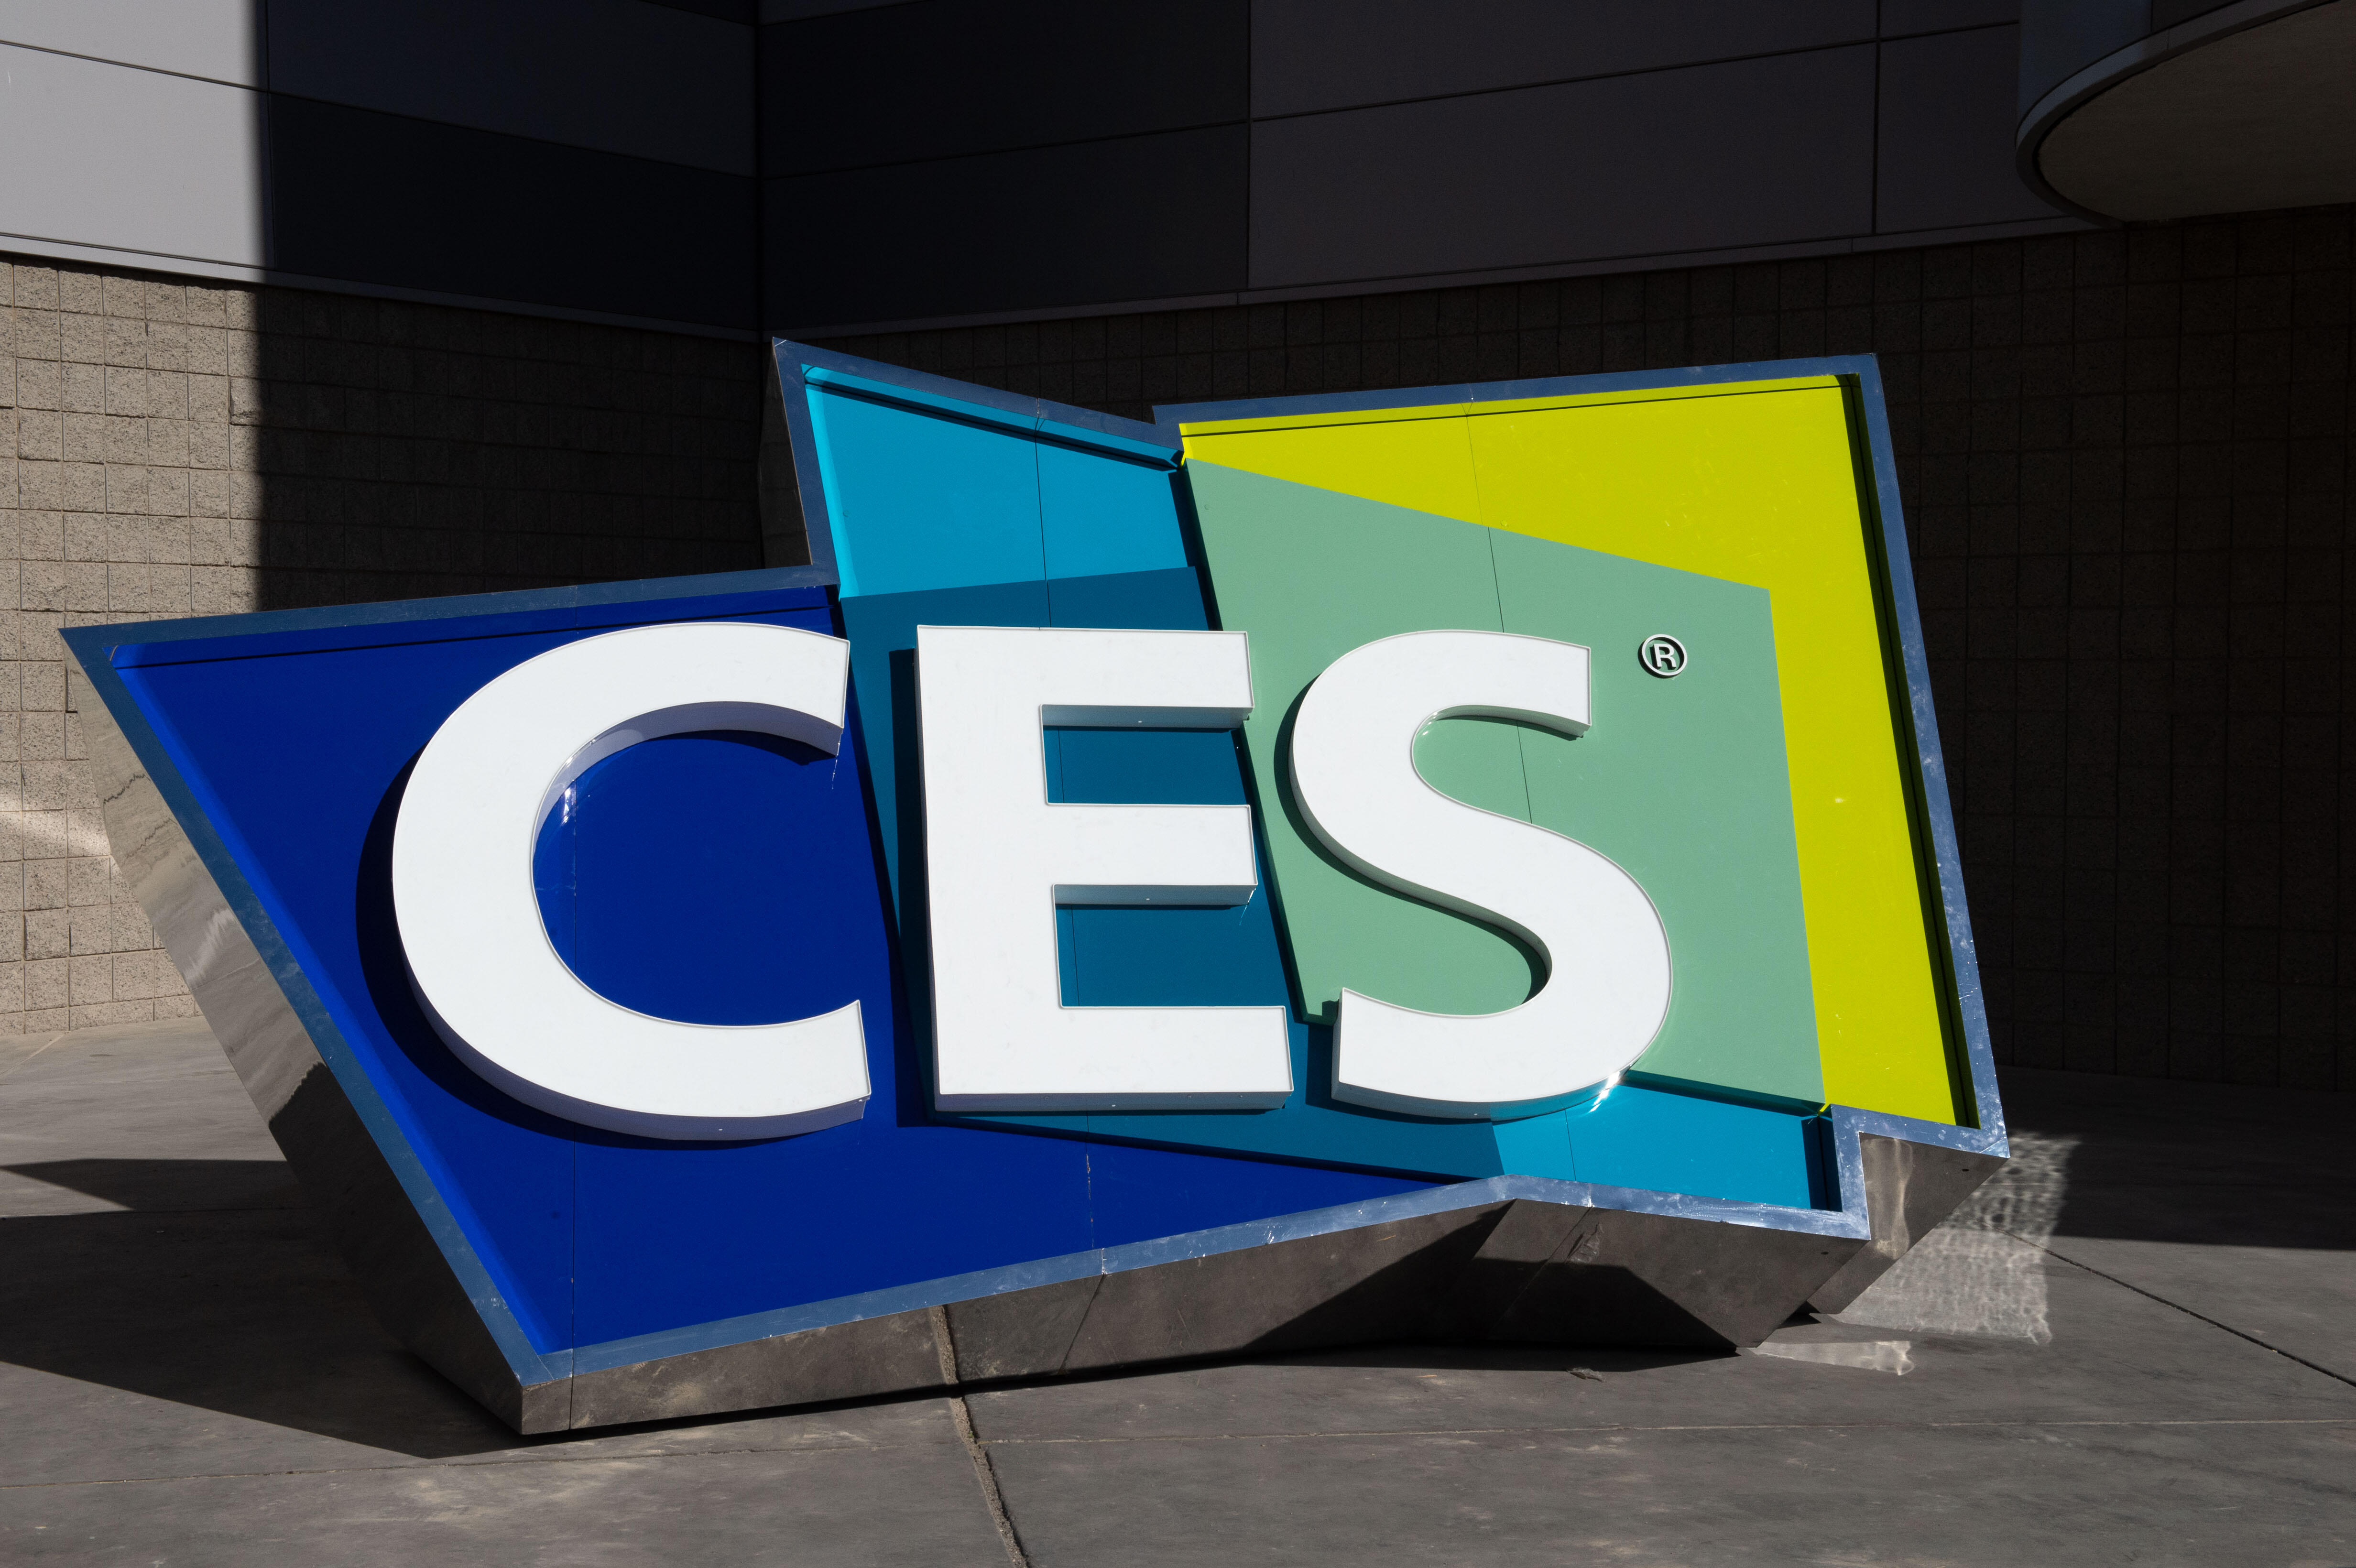 gettyimages-1192017950-ces-2020.jpg